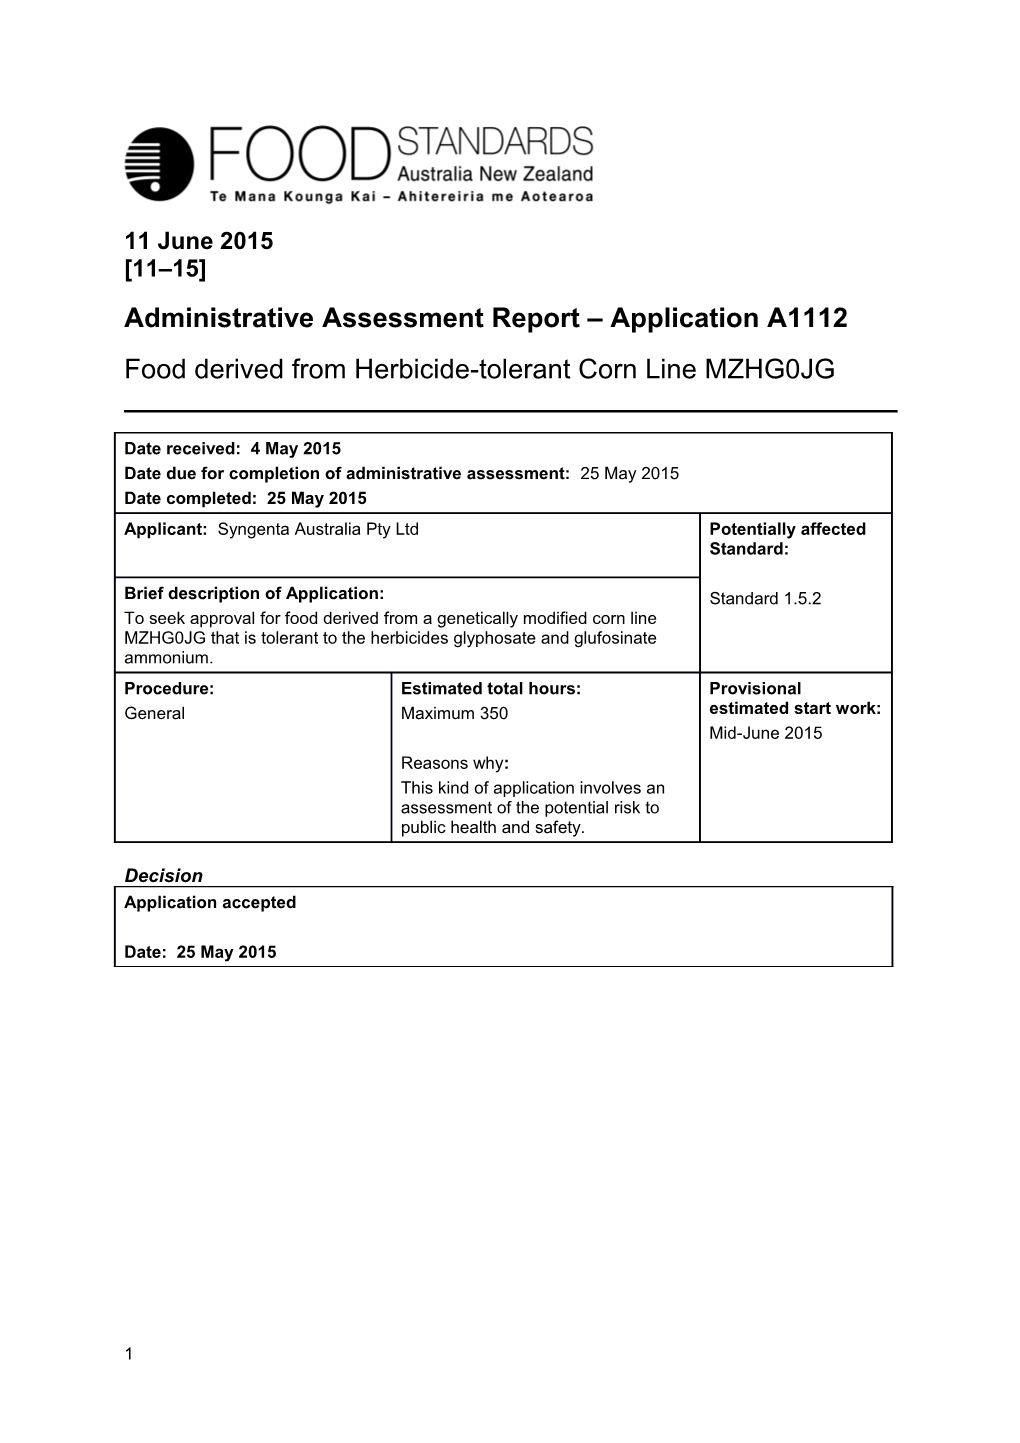 Administrative Assessment Report Application A1112